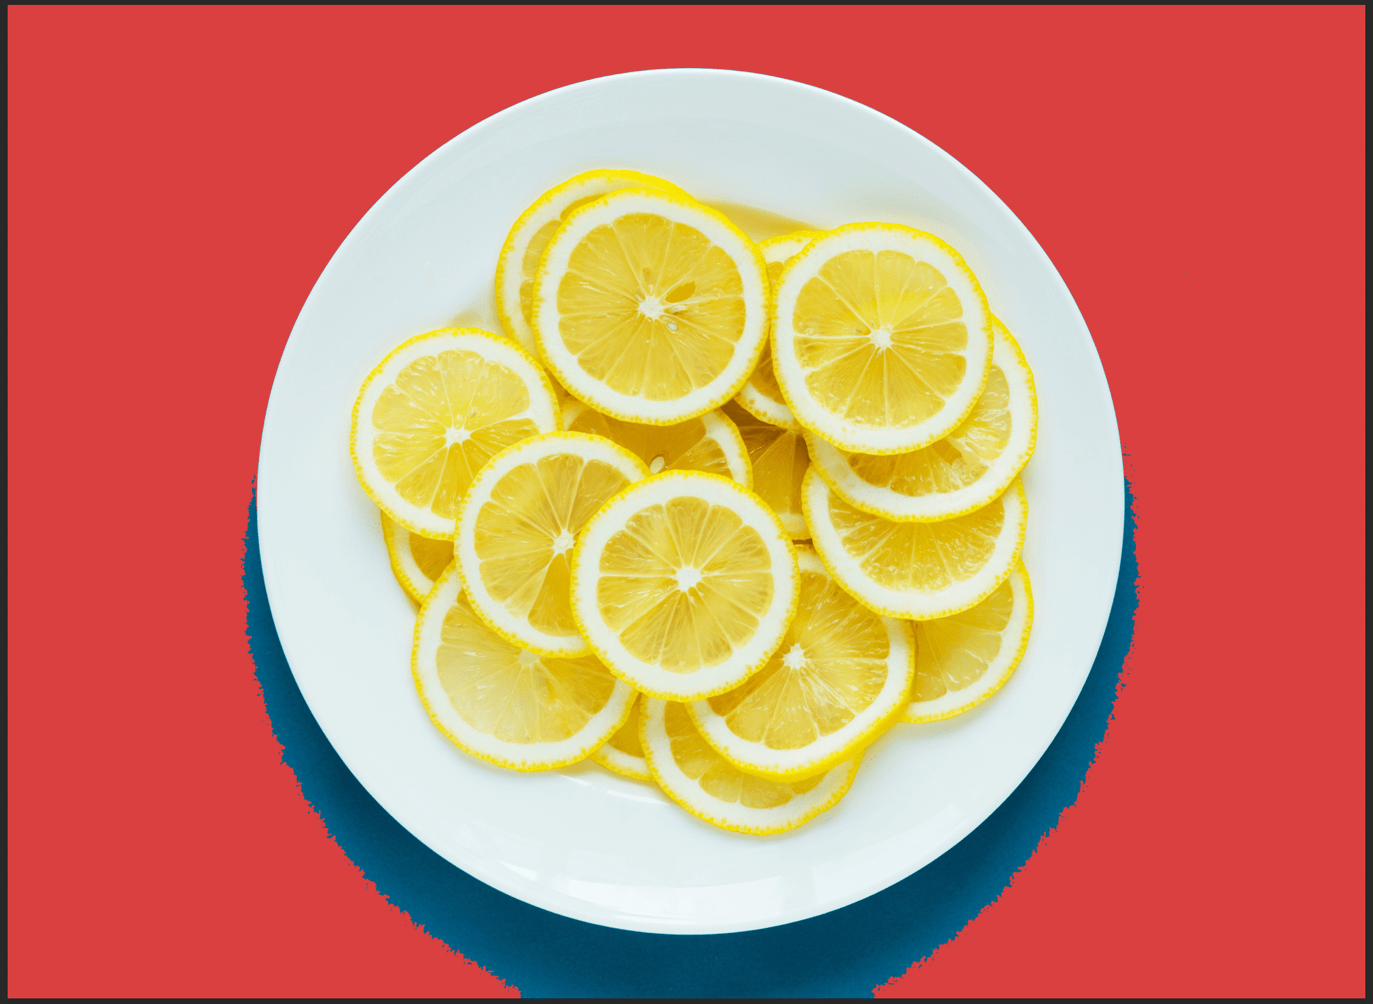 Lemon in a plate with red background